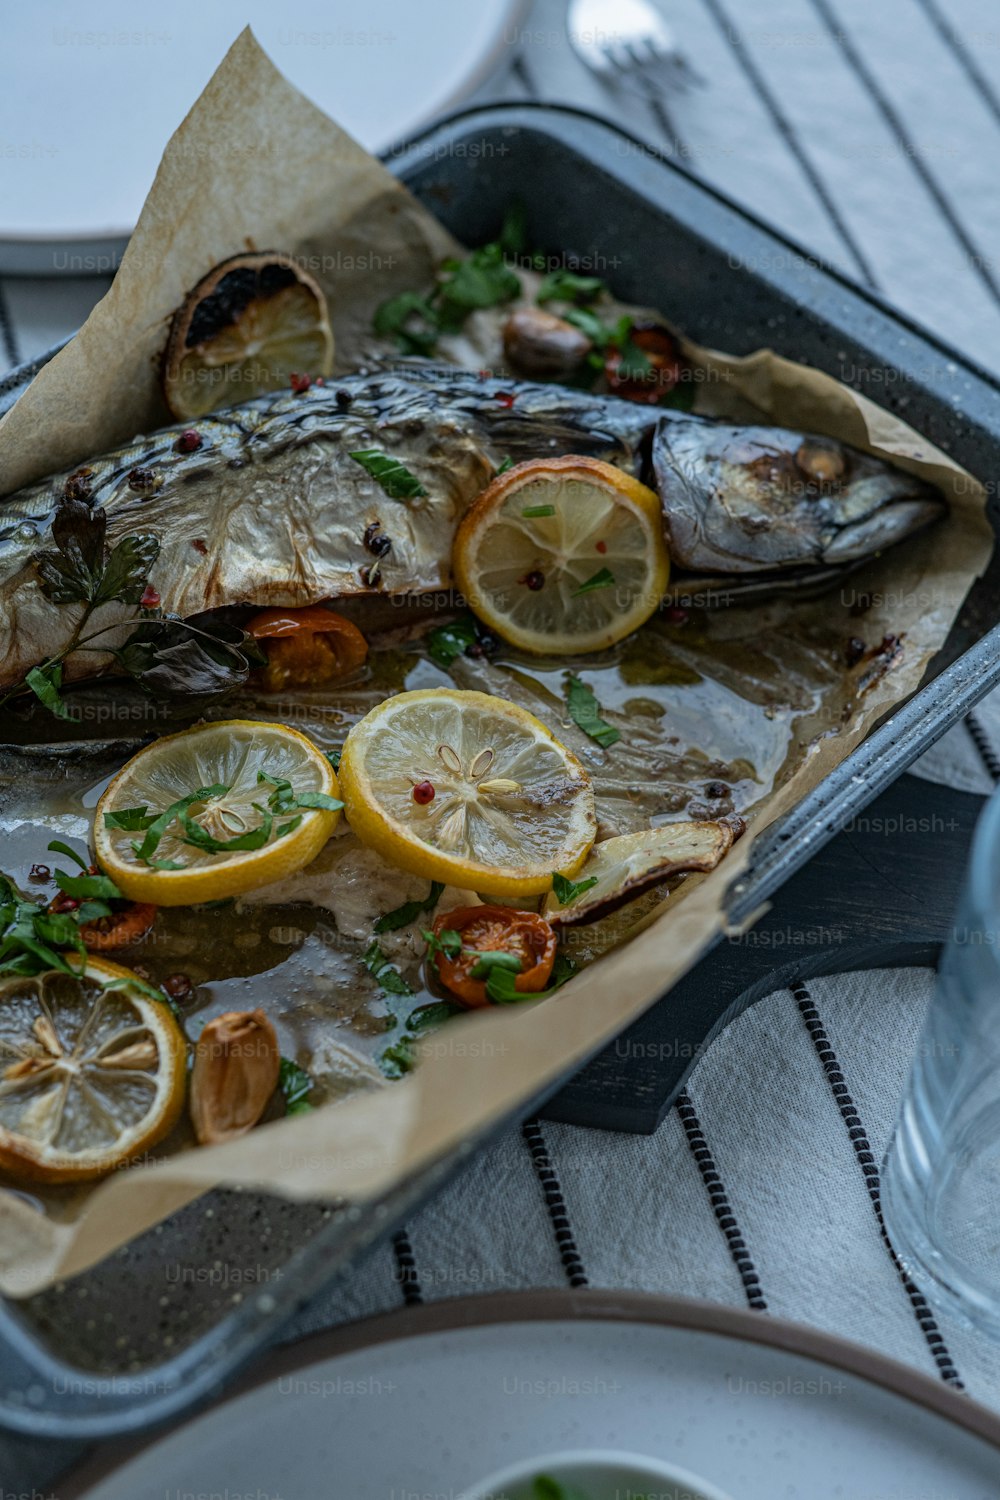 a pan filled with fish and lemon slices